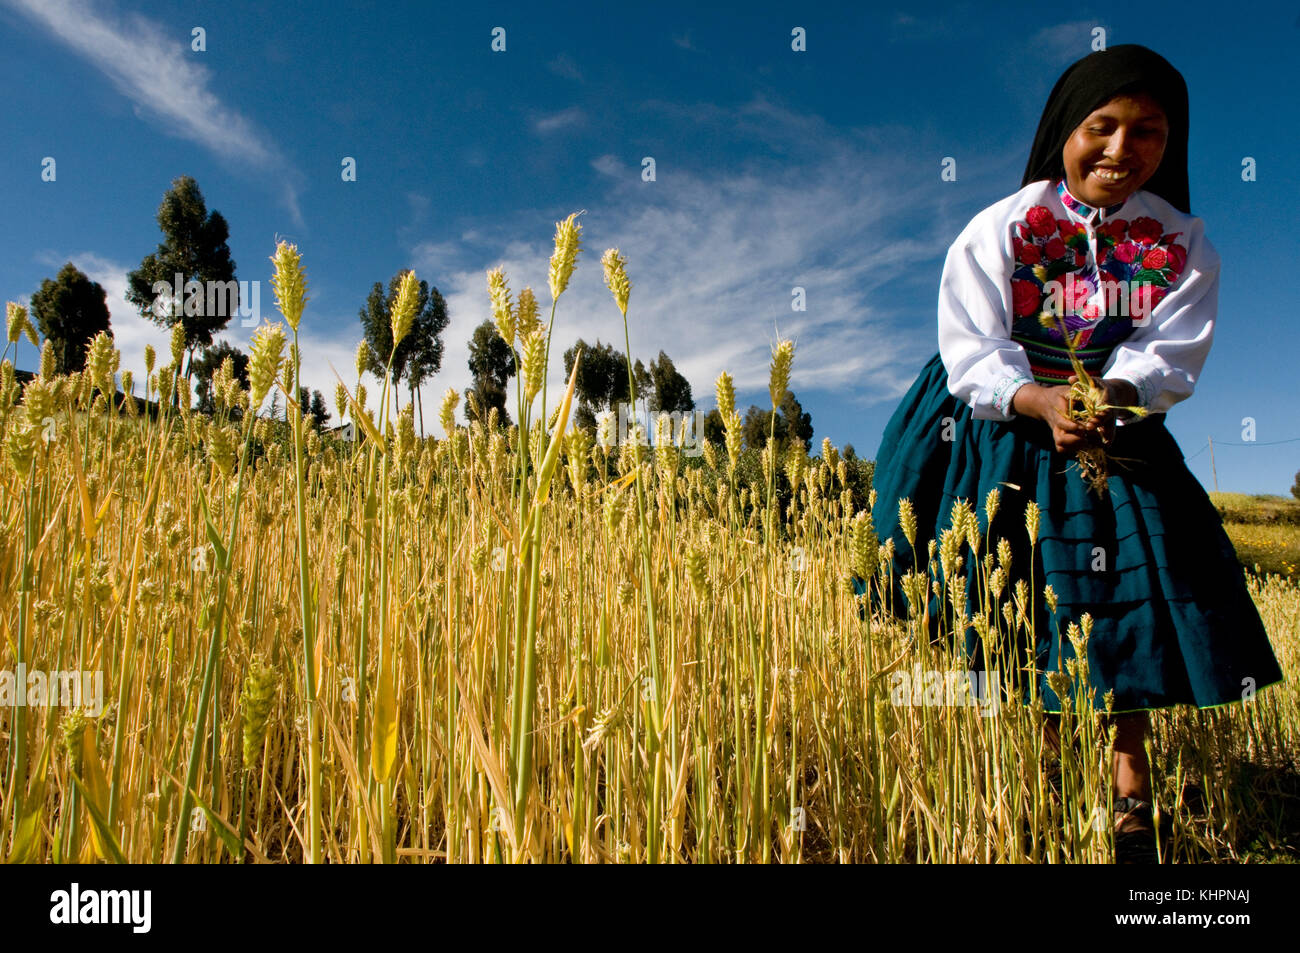 A woman from the island of Amantaní dressed in her typical regional costume. Amantani Island, Lake Titicaca, Puno, Peru Stock Photo